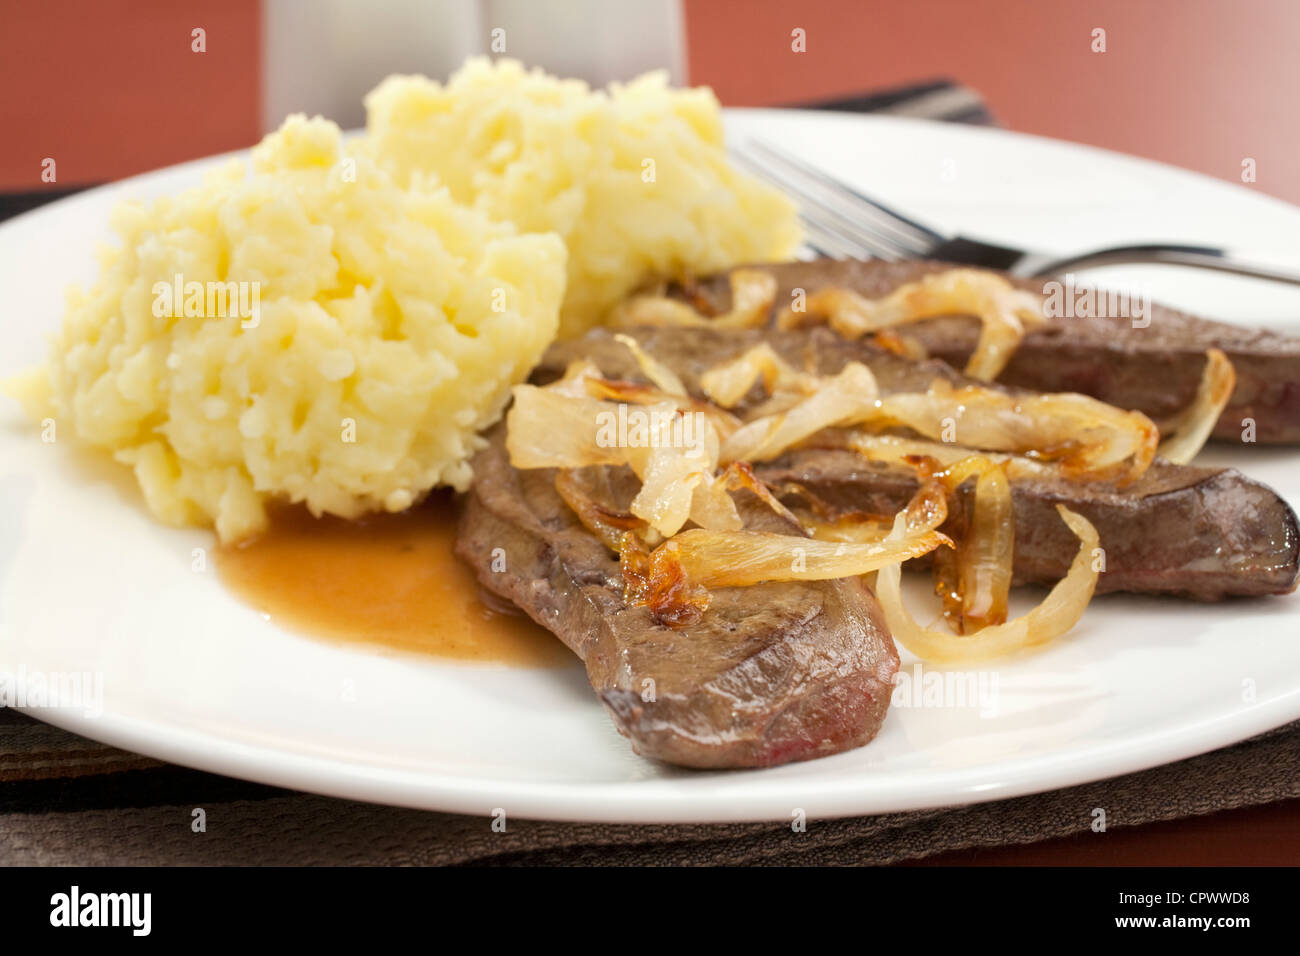 Lamb's liver with caramelised onions and mashed potato on a white plate. Stock Photo